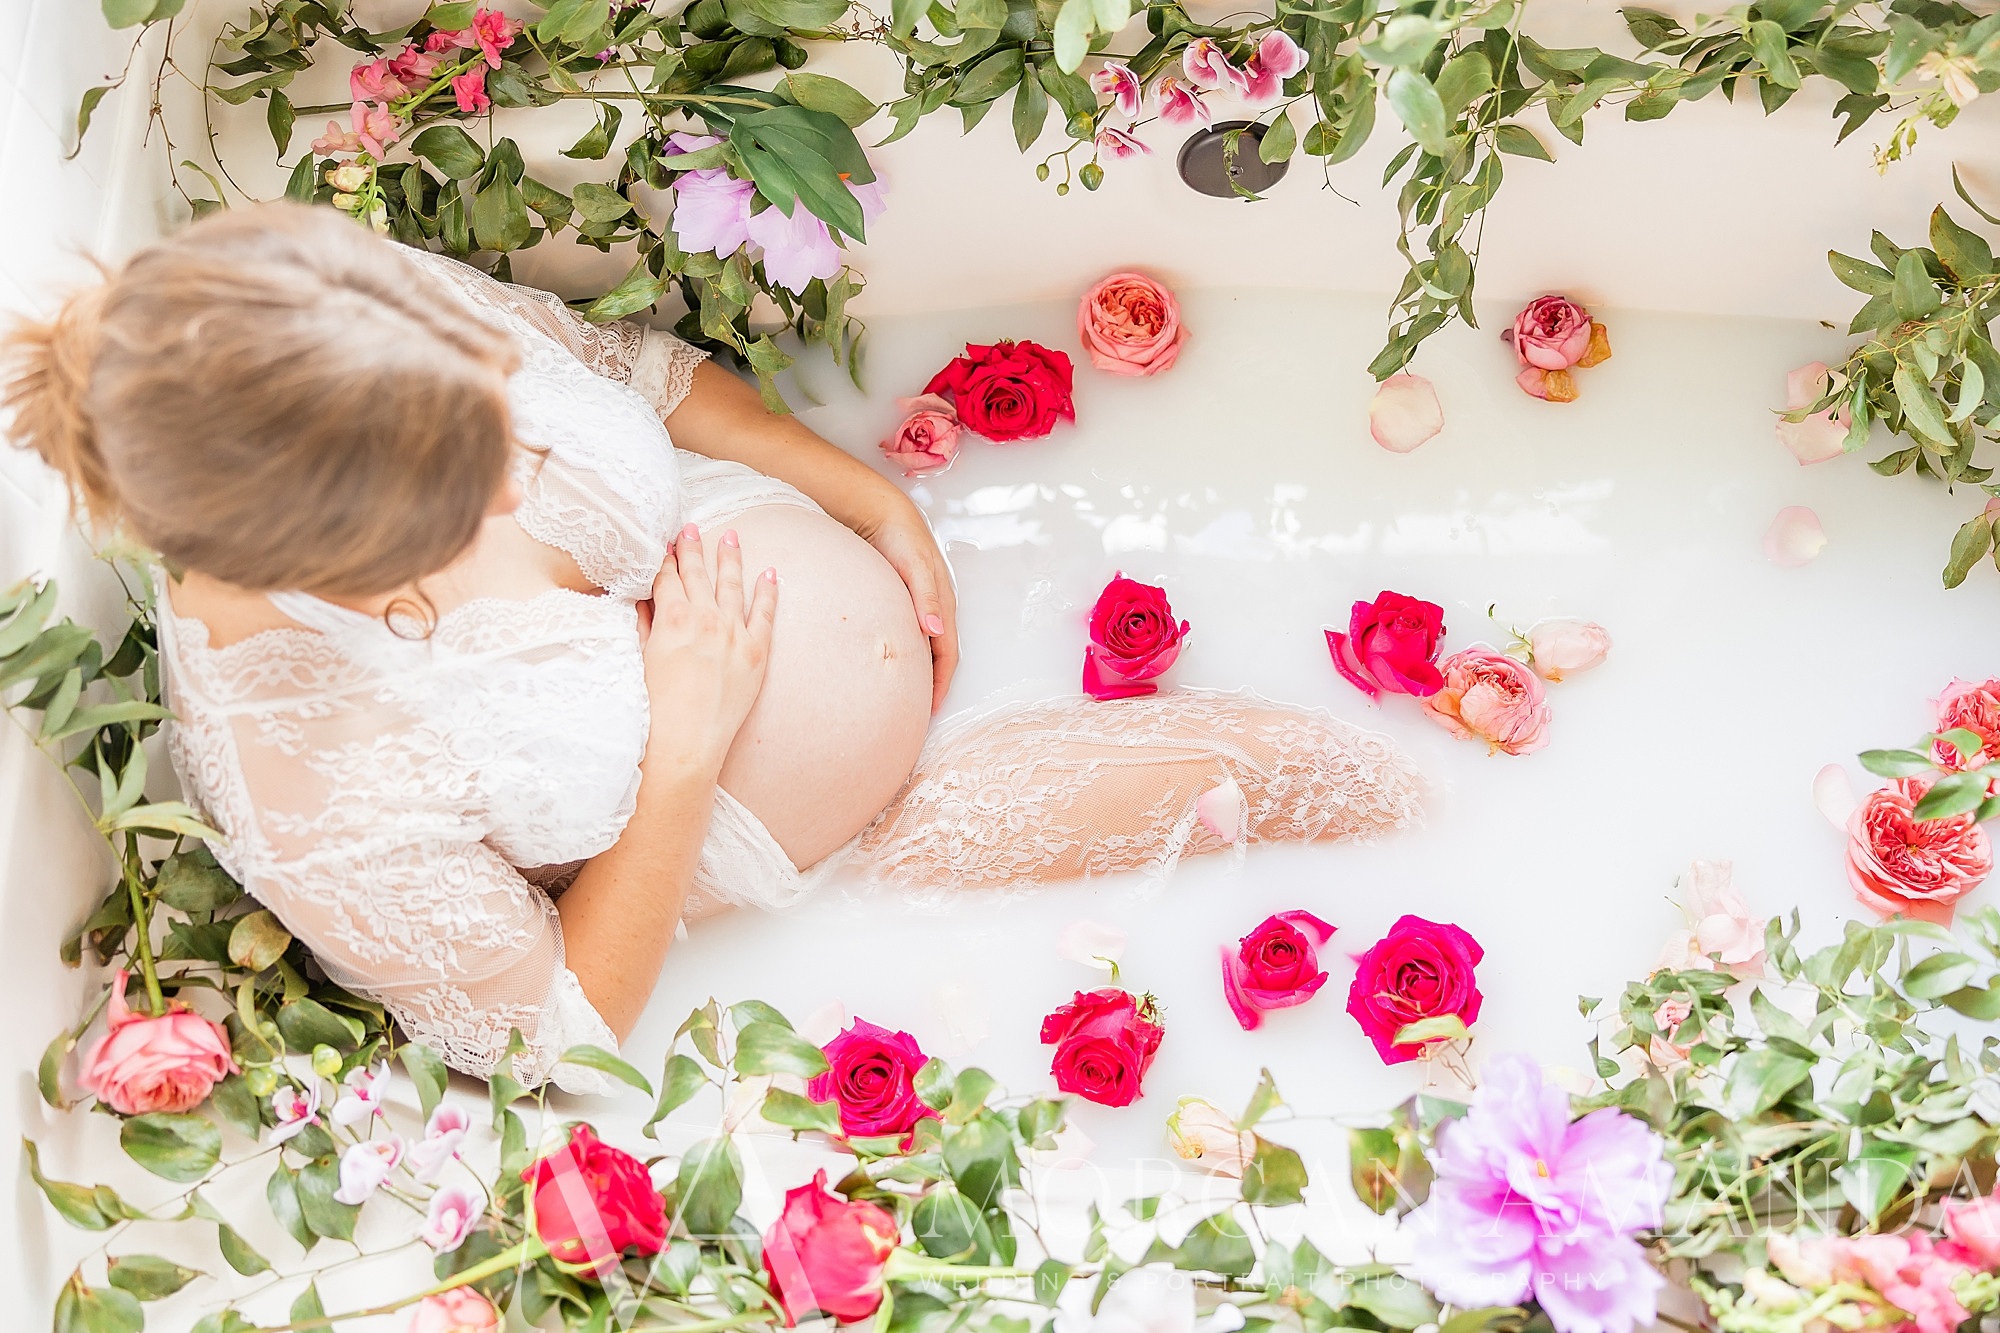 woman rests in tub with flowers around her during milk bath